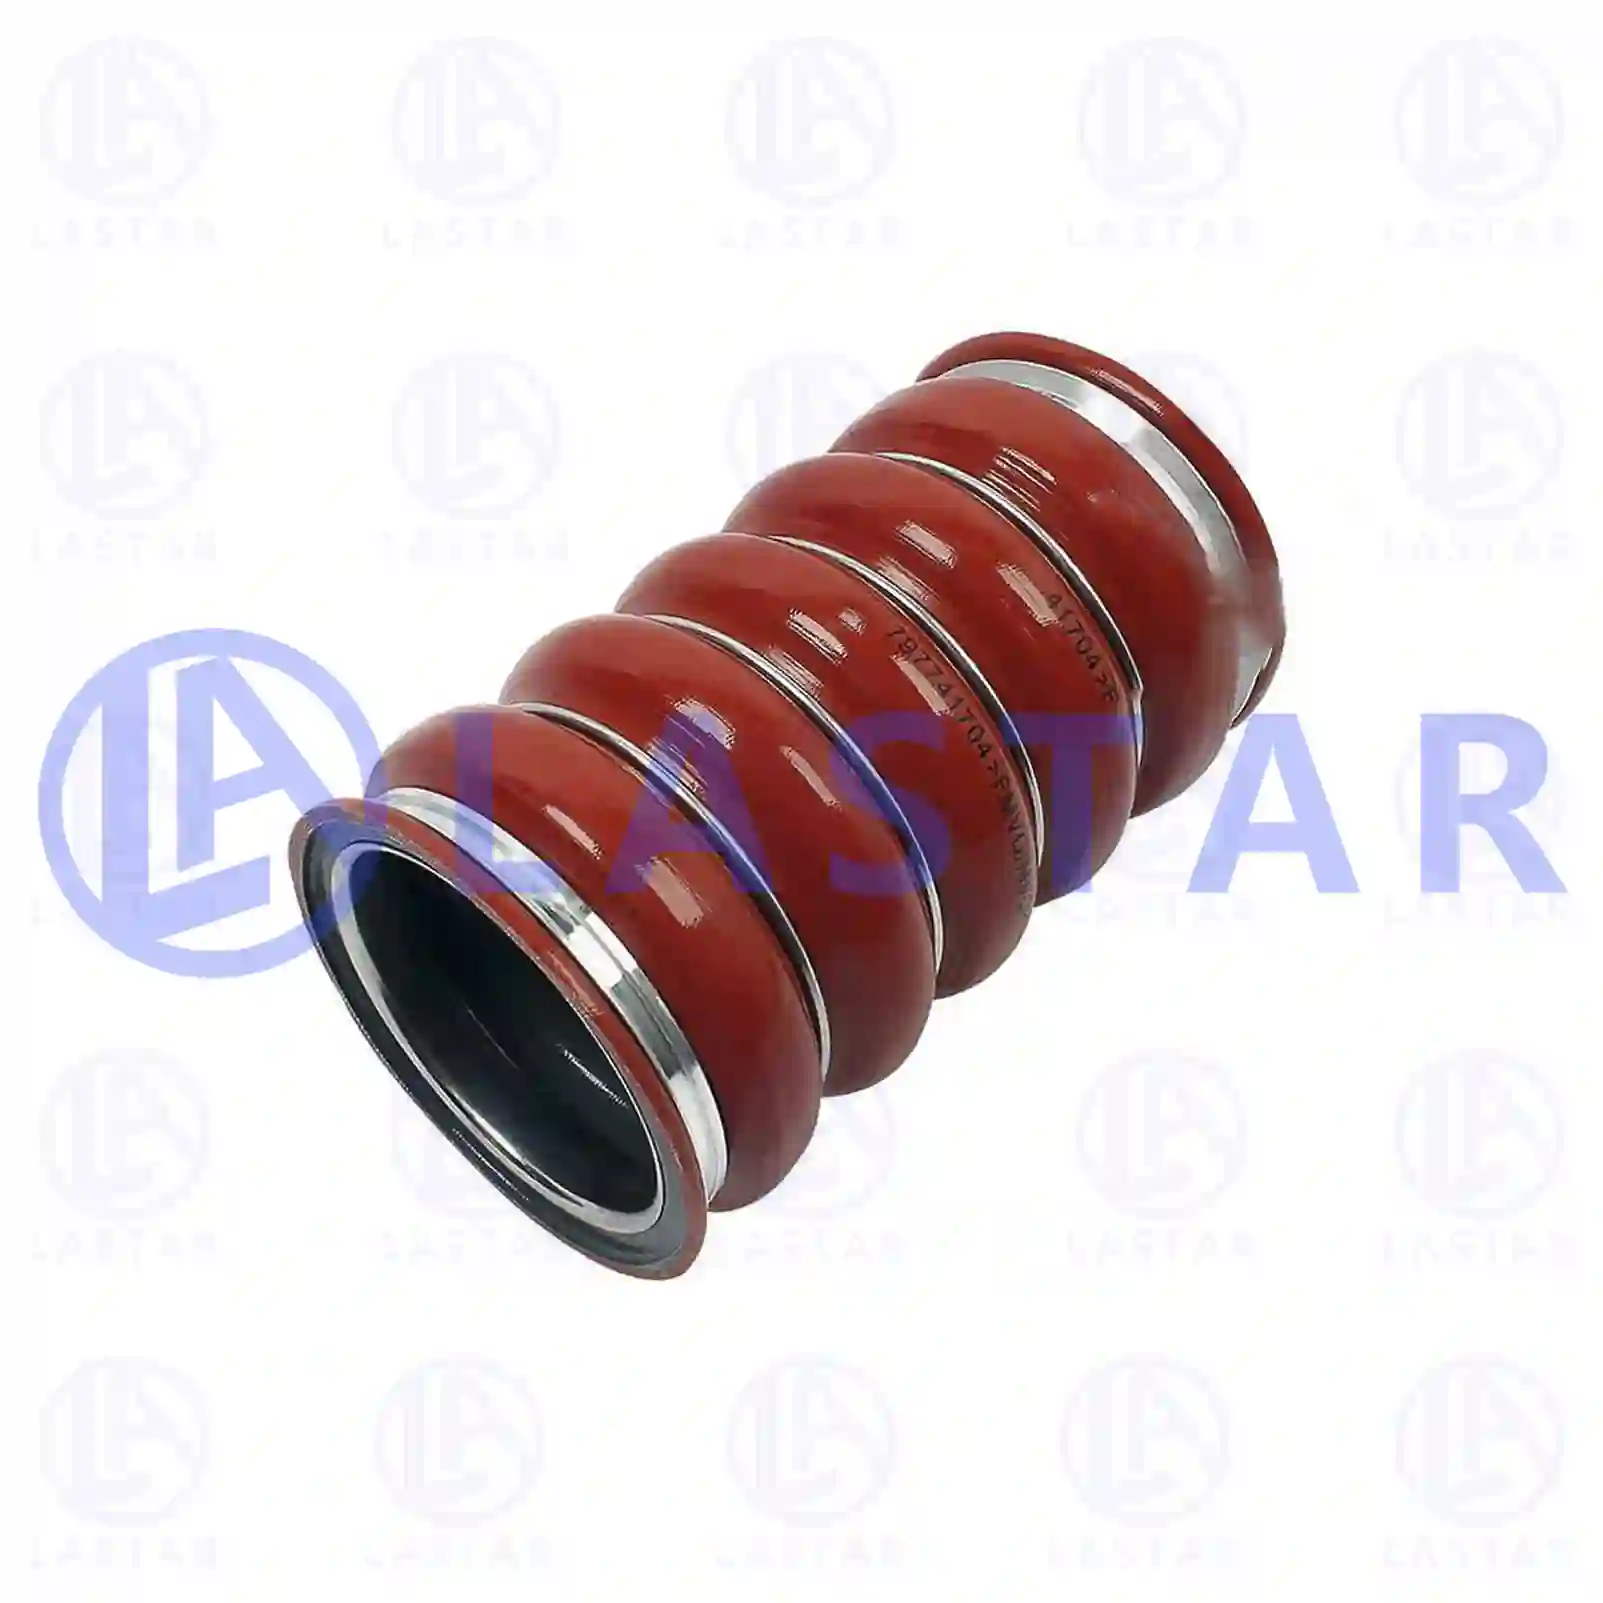 Charge air hose, 77708888, 1522010, 1522011, 1794725, 1809771, 522010, 522011, ZG00287-0008 ||  77708888 Lastar Spare Part | Truck Spare Parts, Auotomotive Spare Parts Charge air hose, 77708888, 1522010, 1522011, 1794725, 1809771, 522010, 522011, ZG00287-0008 ||  77708888 Lastar Spare Part | Truck Spare Parts, Auotomotive Spare Parts